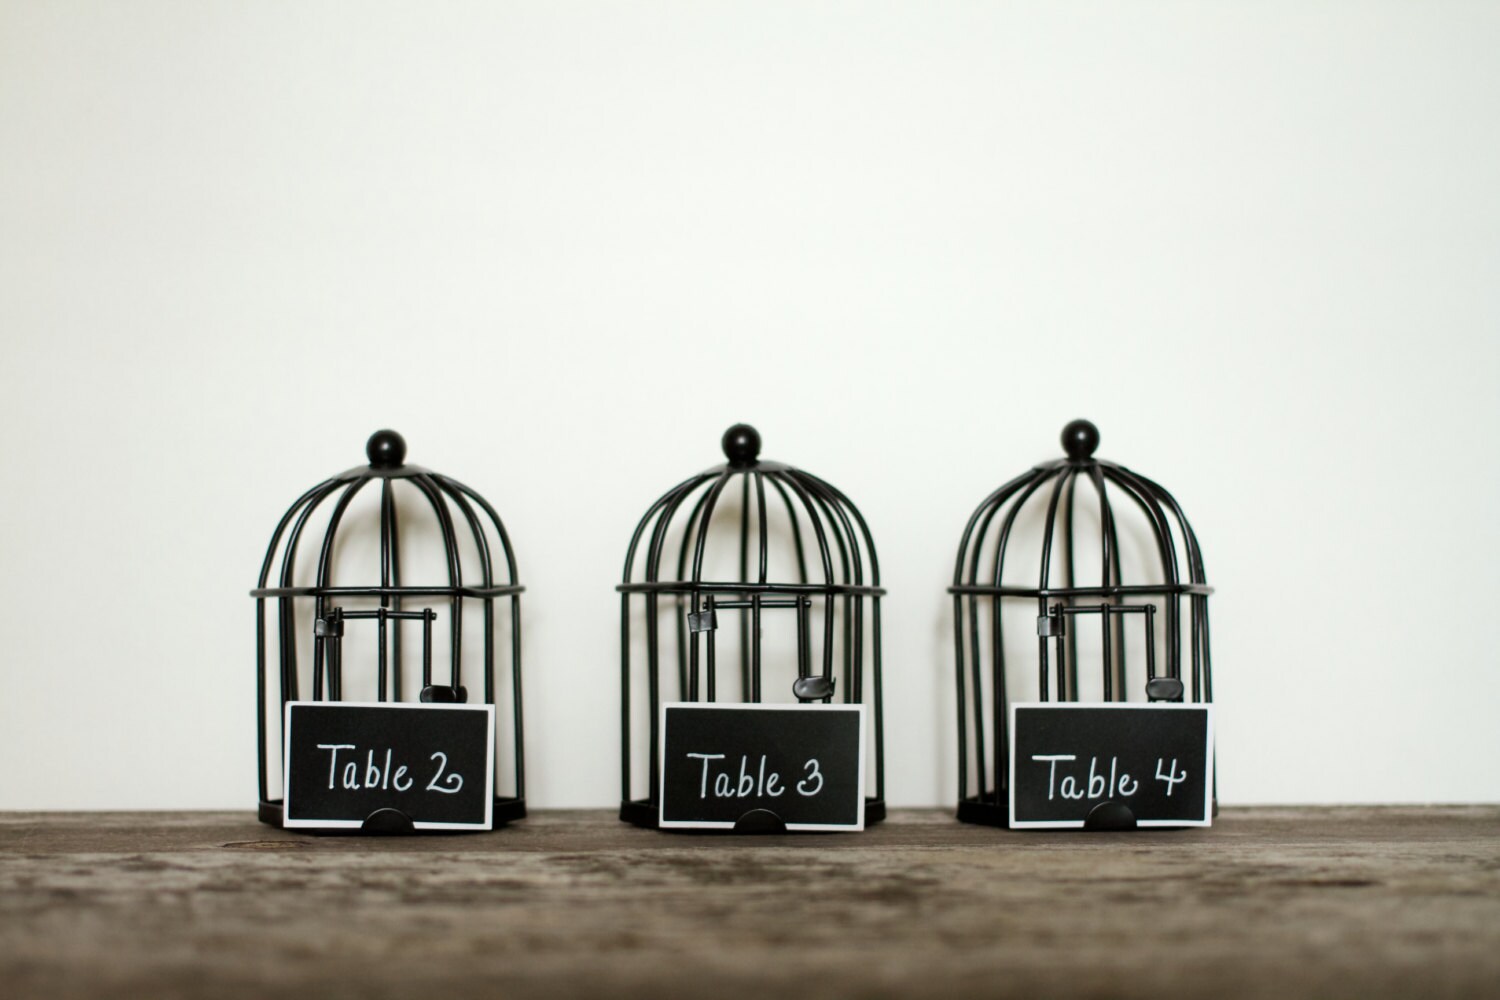 5 Mini Birdcages 4.25" x 2.75" with Blank Chalk Labels Rustic for Rustic Table Numbers Wedding Chalkboard Centerpieces Love Birds Bird Cage